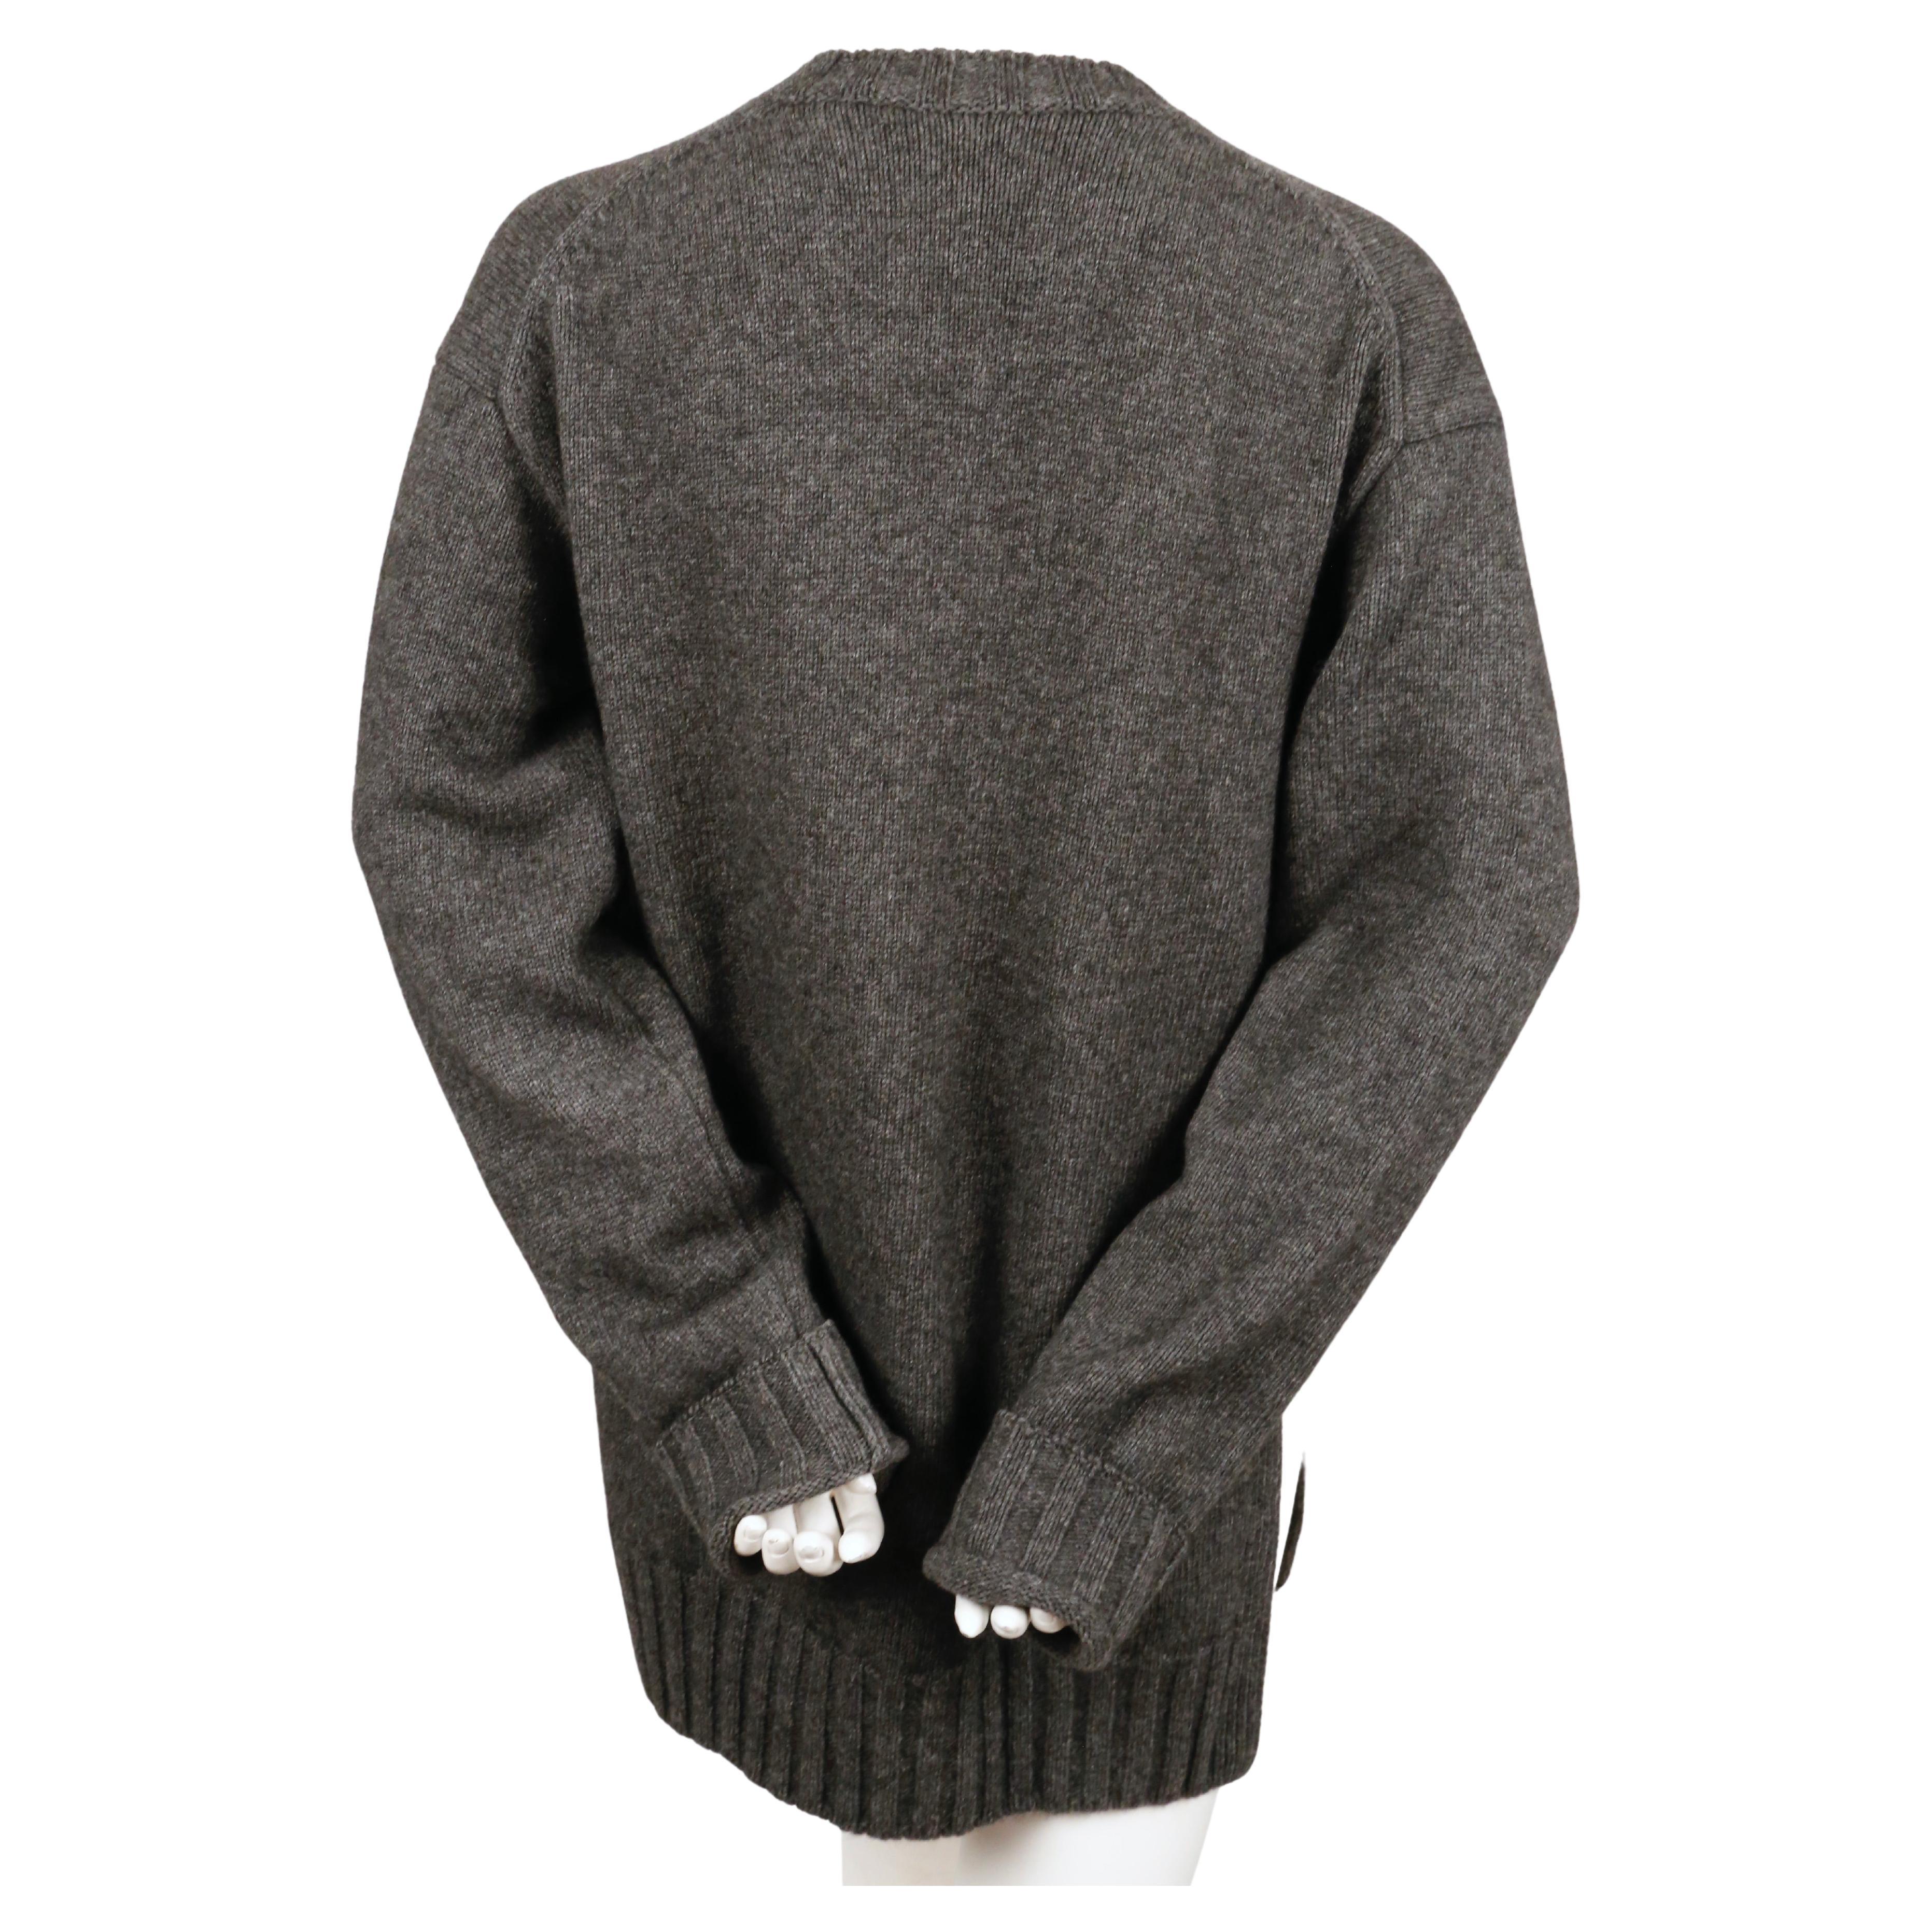 CELINE by PHOEBE PHILO marled dark grey sweater with patch pocket and split side For Sale 2